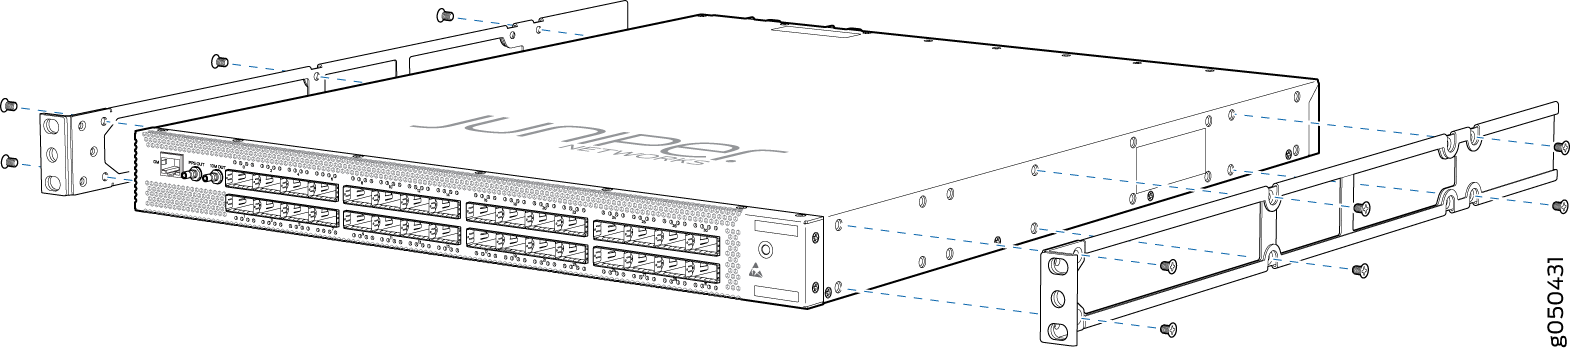 Attaching Mounting Rails to the QFX5200-32C or QFX5200-32C-L